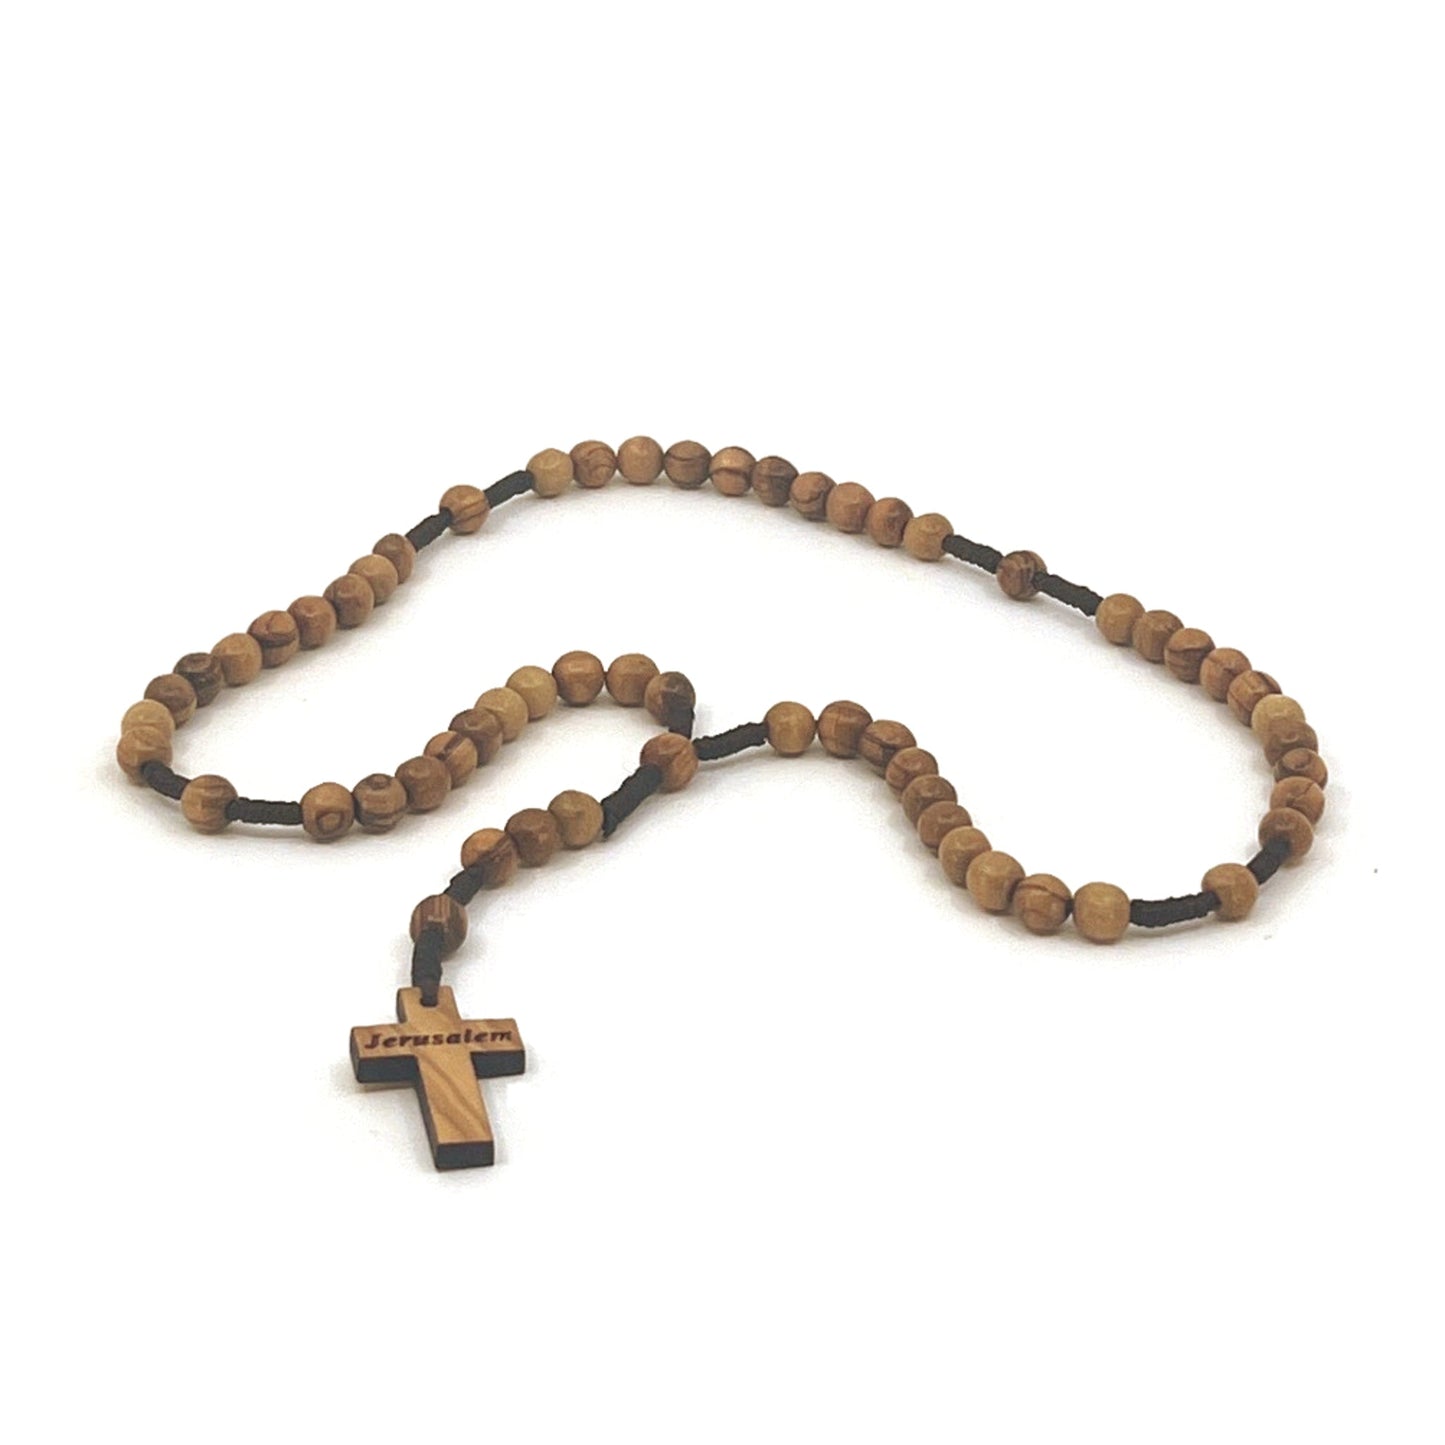 Set of 6, Rosaries with Wooden Beads and Engraved Crucifix, Handmade in Bethlehem